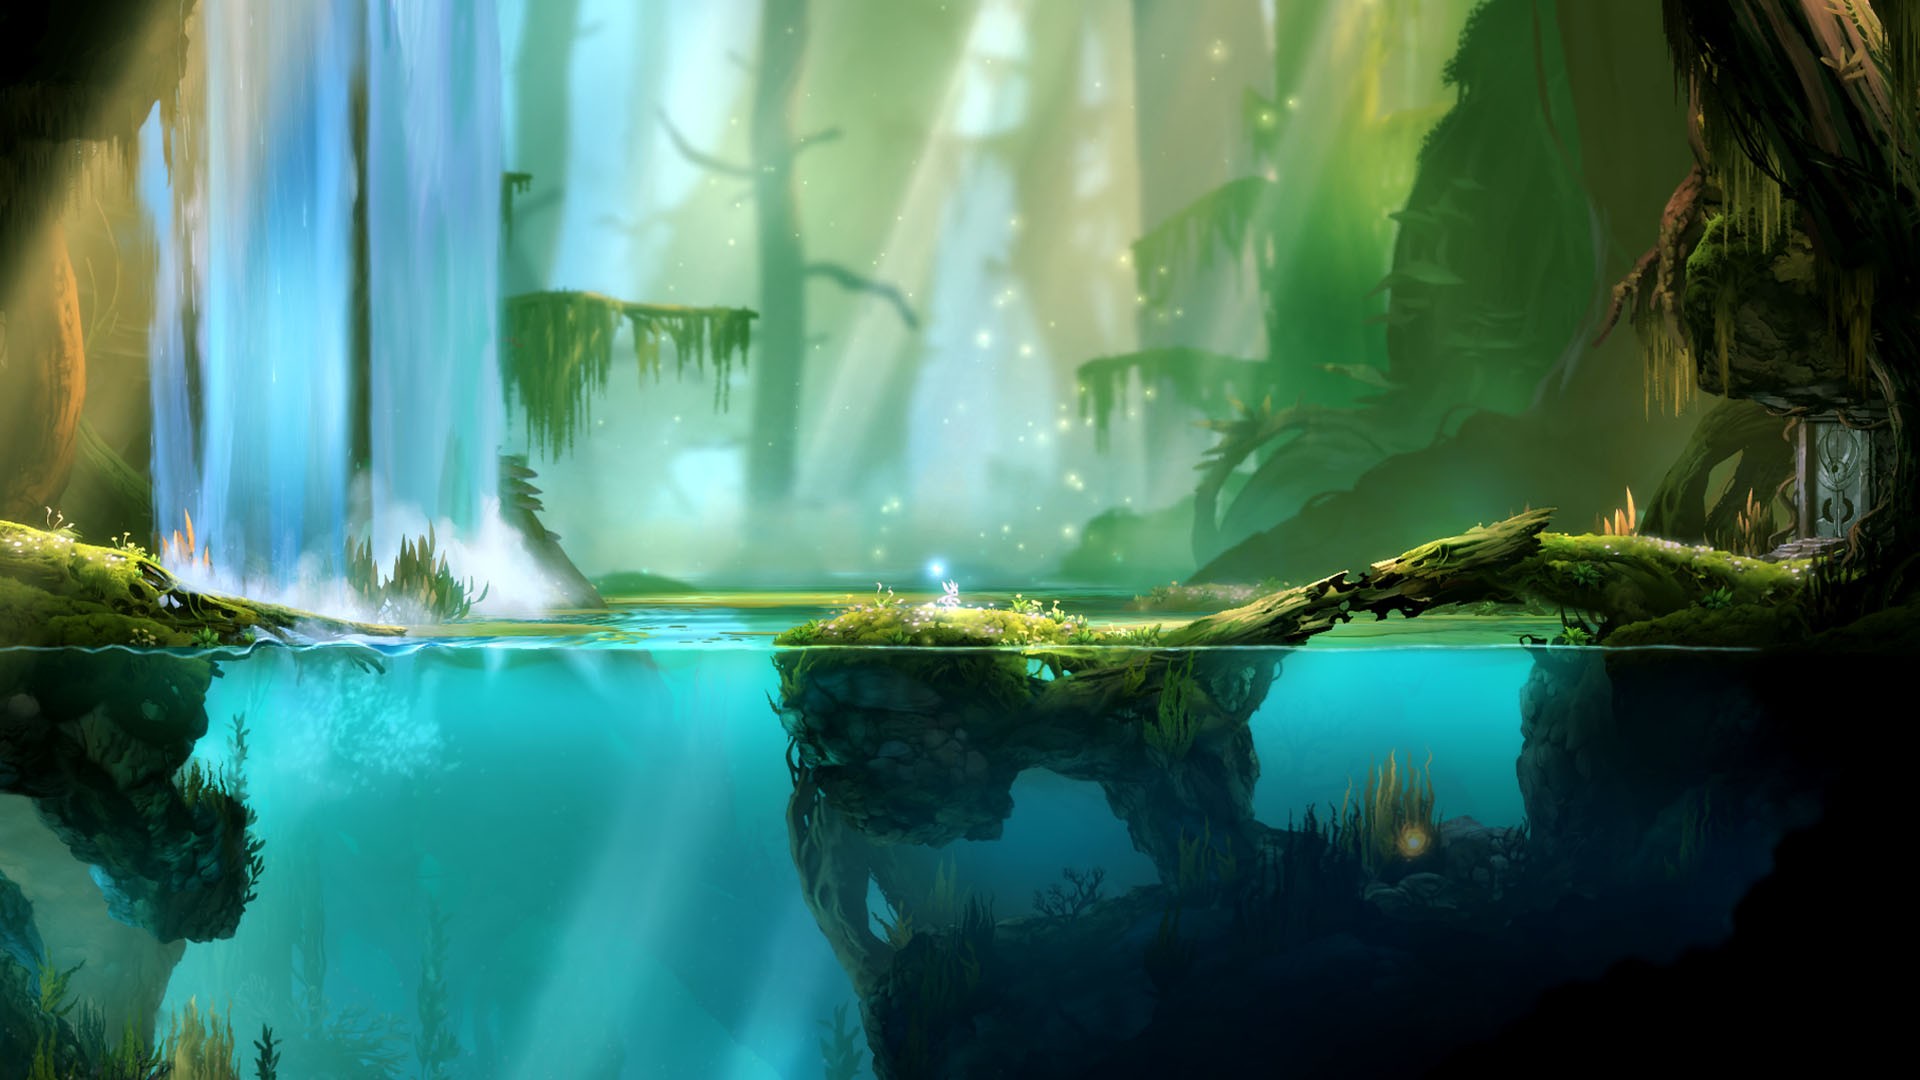 General 1920x1080 digital art video games water trees underwater sunlight rocks mist fantasy art swamp split view roots forest Ori and the Blind Forest waterfall